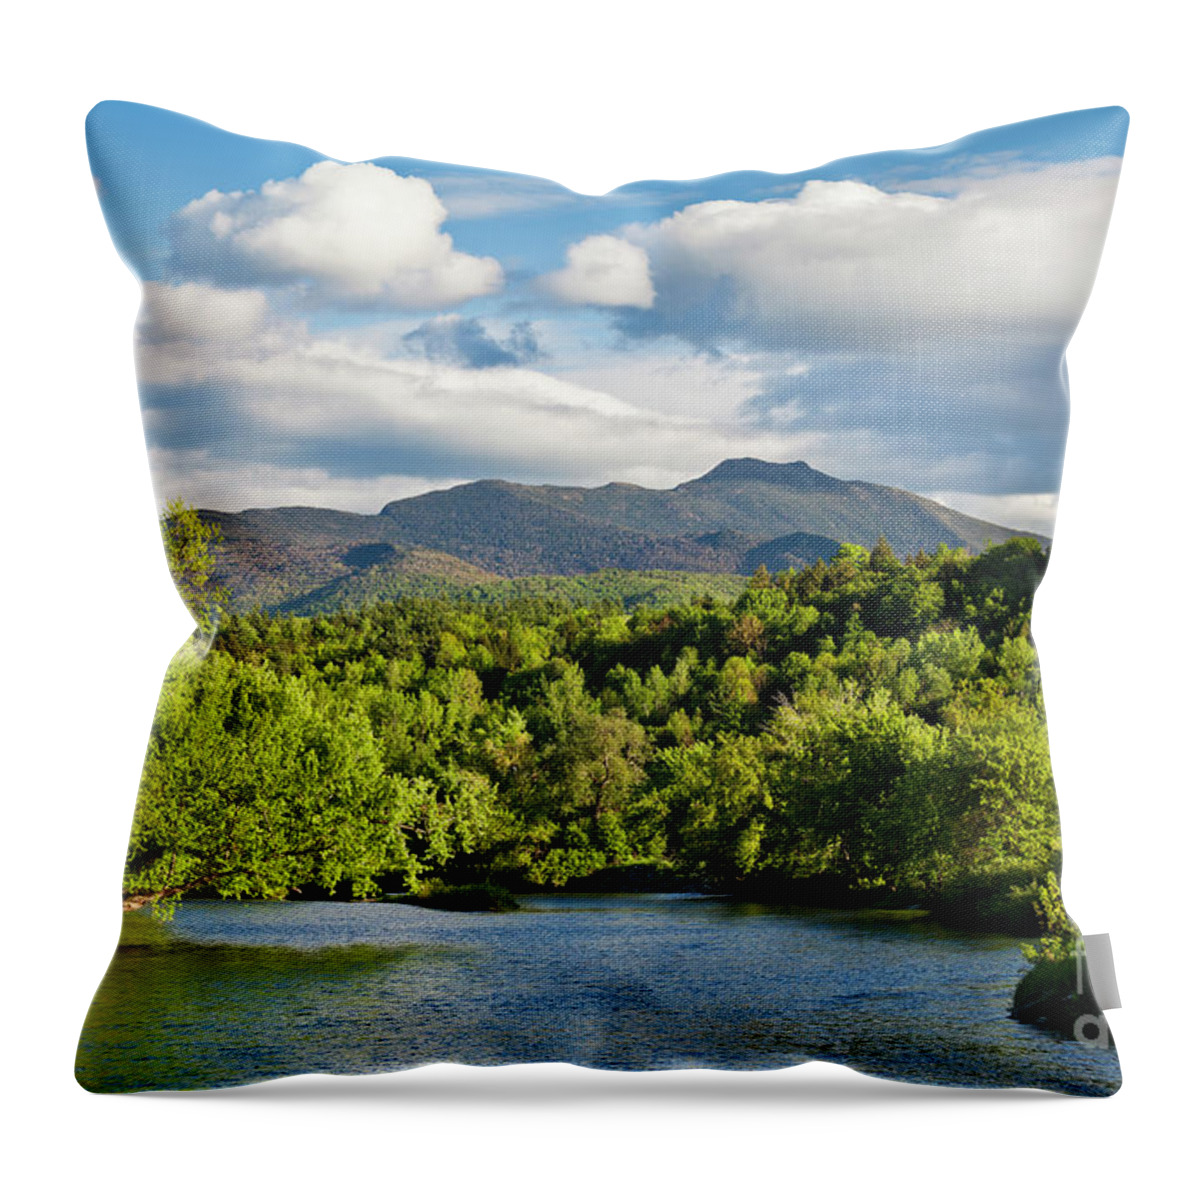 Spring Throw Pillow featuring the photograph Lamoille River Spring View by Alan L Graham